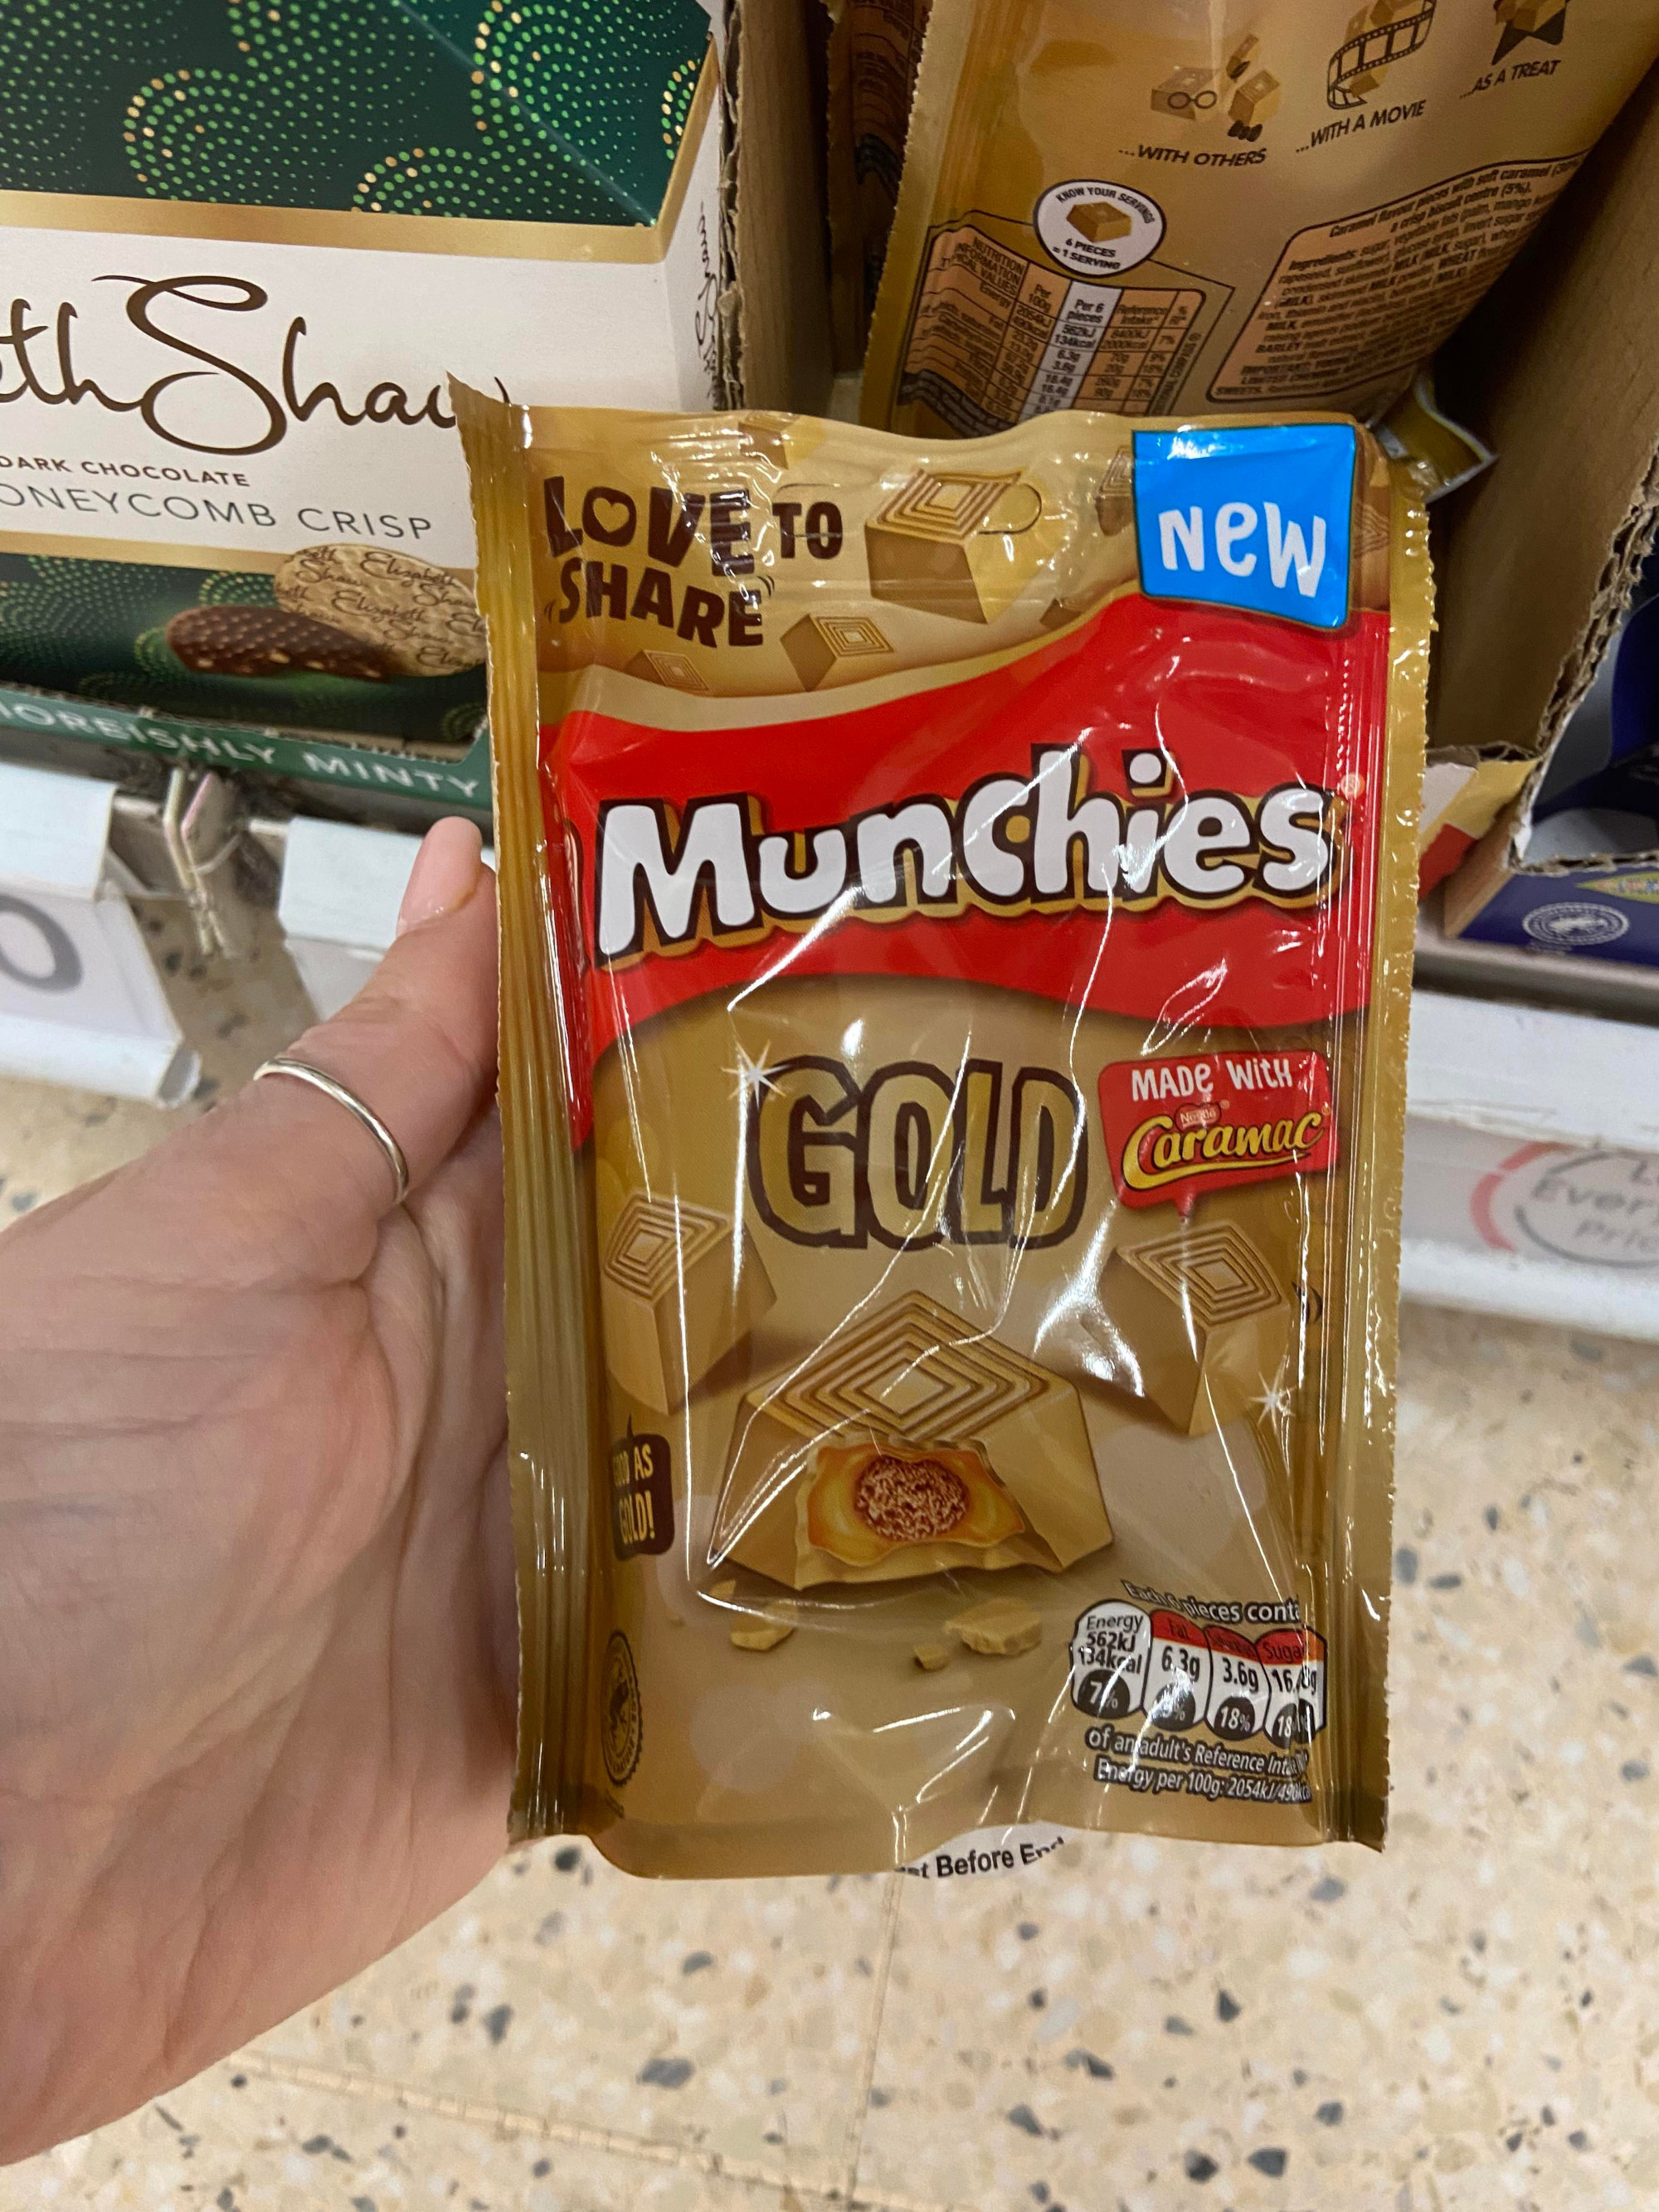 NEW Munchies Gold Caramac Pouch